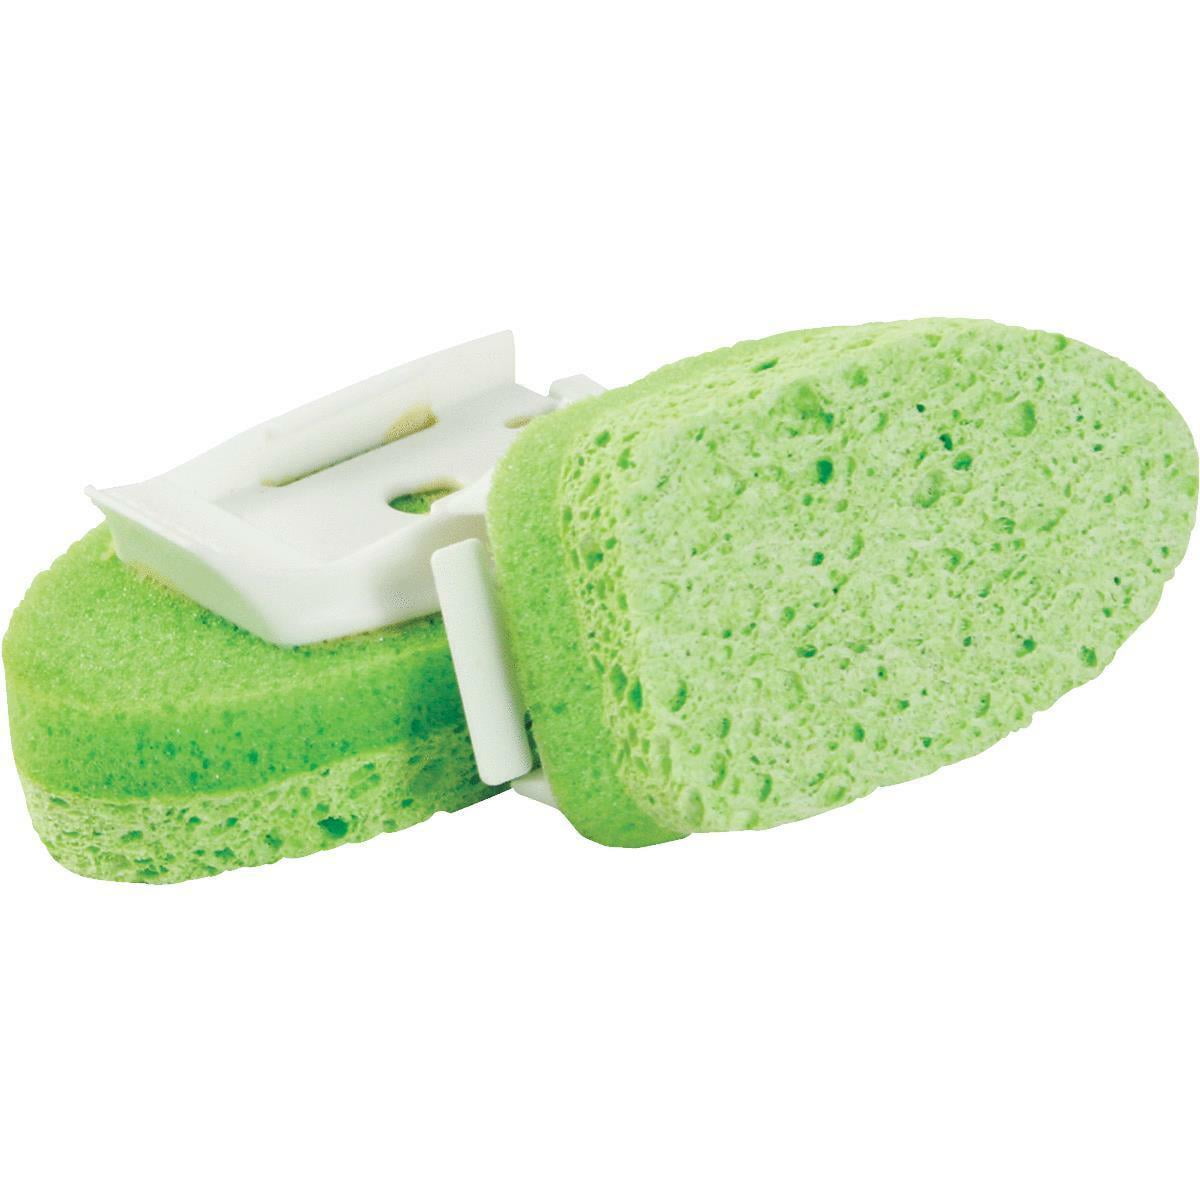 FULL CIRCLE CLEANING PRODUCTS Suds Up Dish Sponge Refills Green 1 EA 